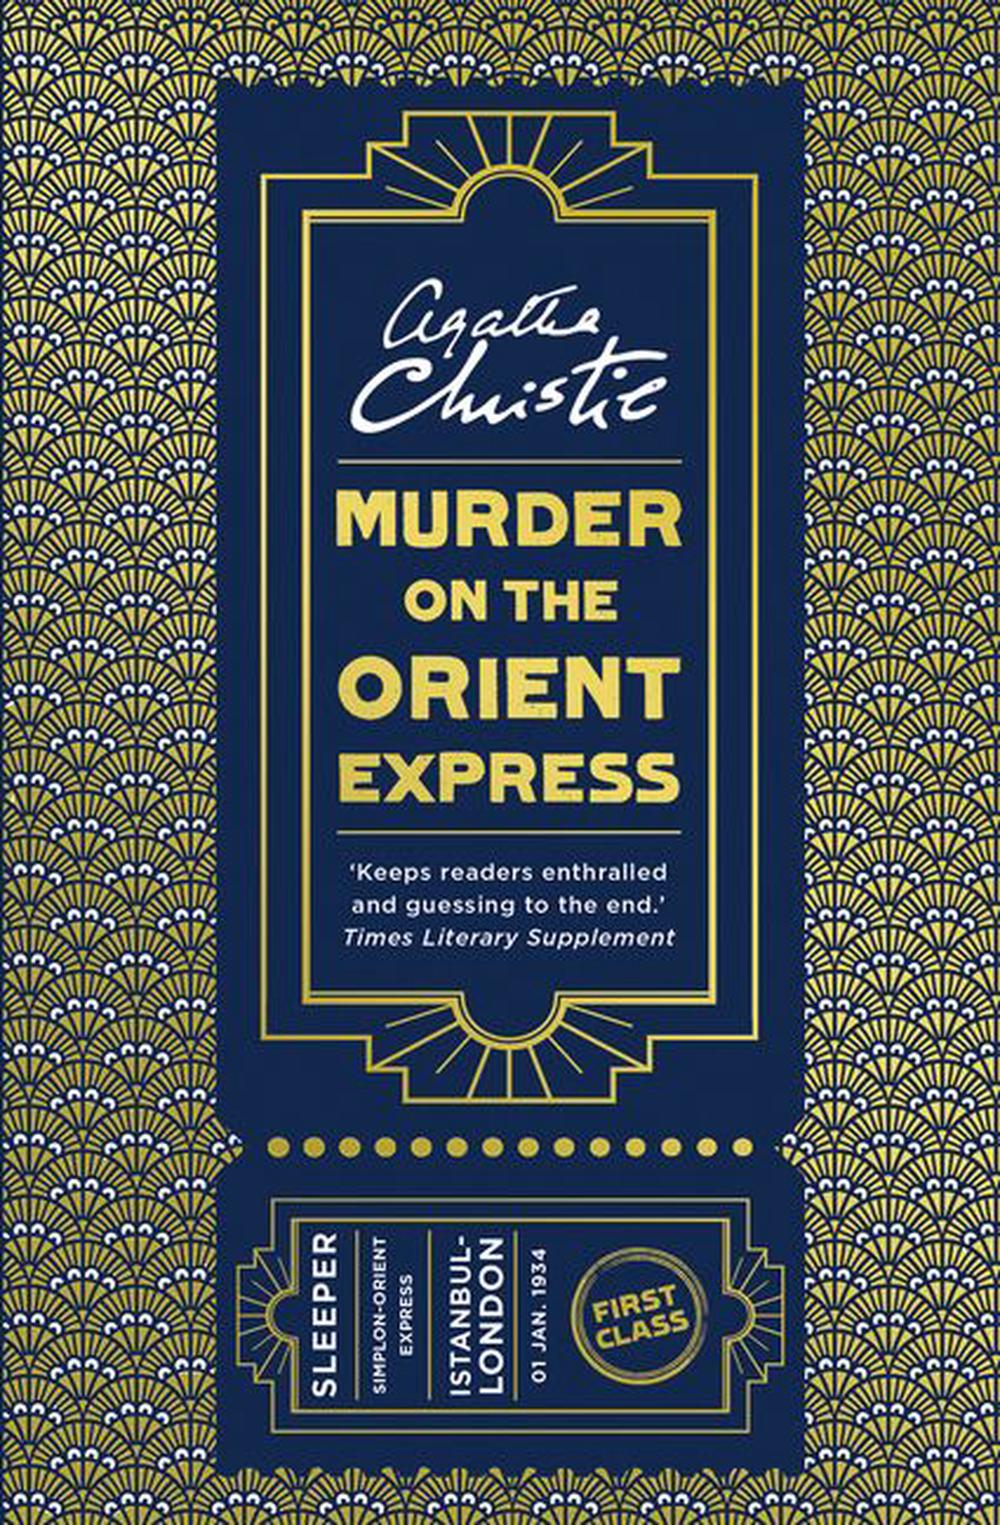 Murder on the Orient Express by Agatha Christie